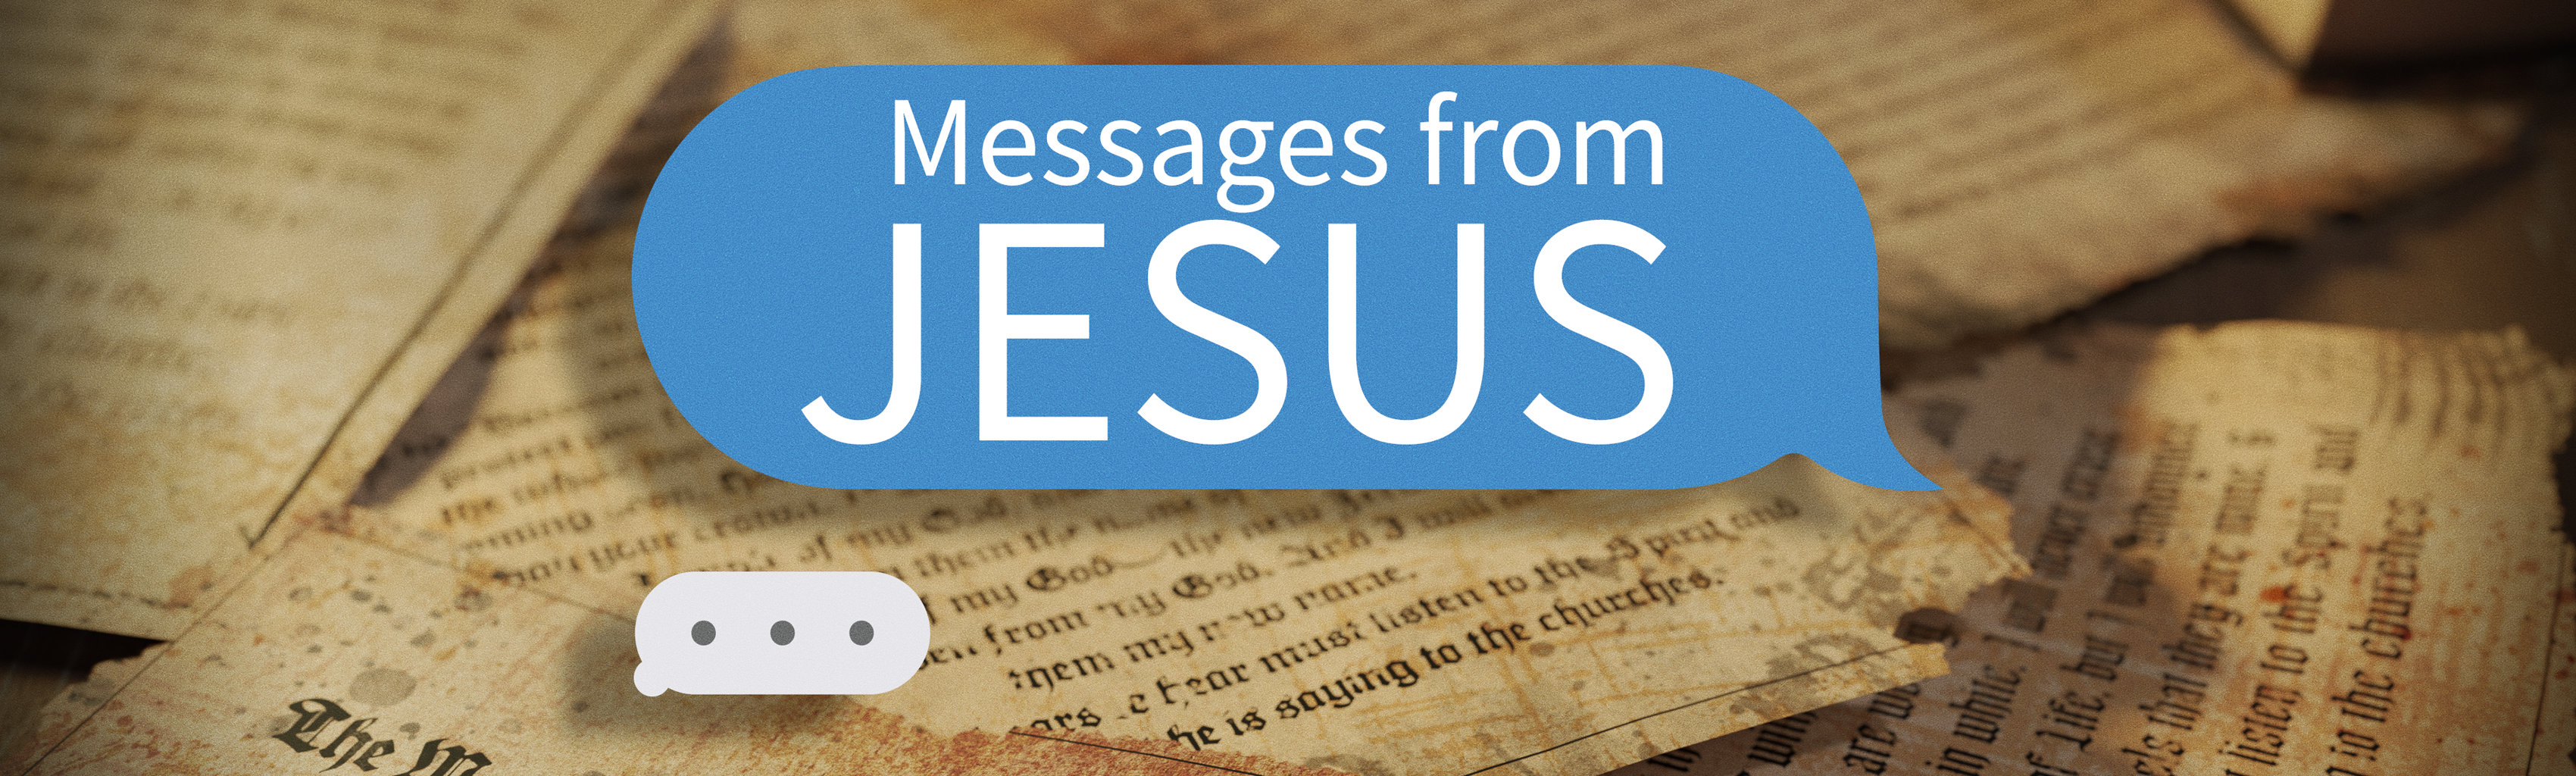 Messages From Jesus banner